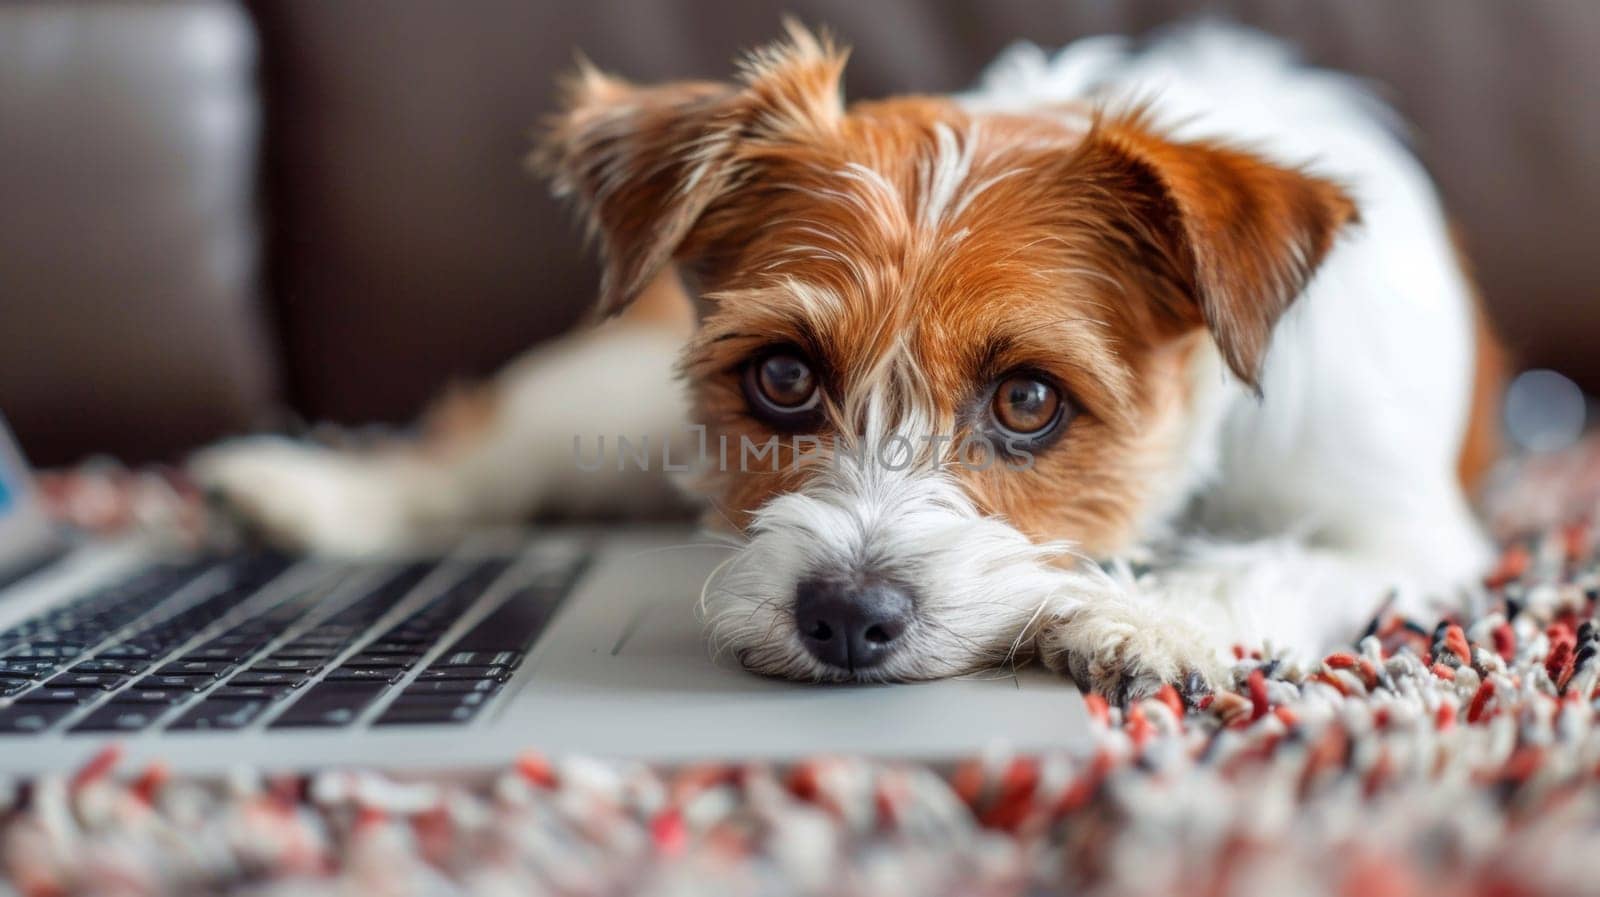 A small dog laying on a rug next to an open laptop